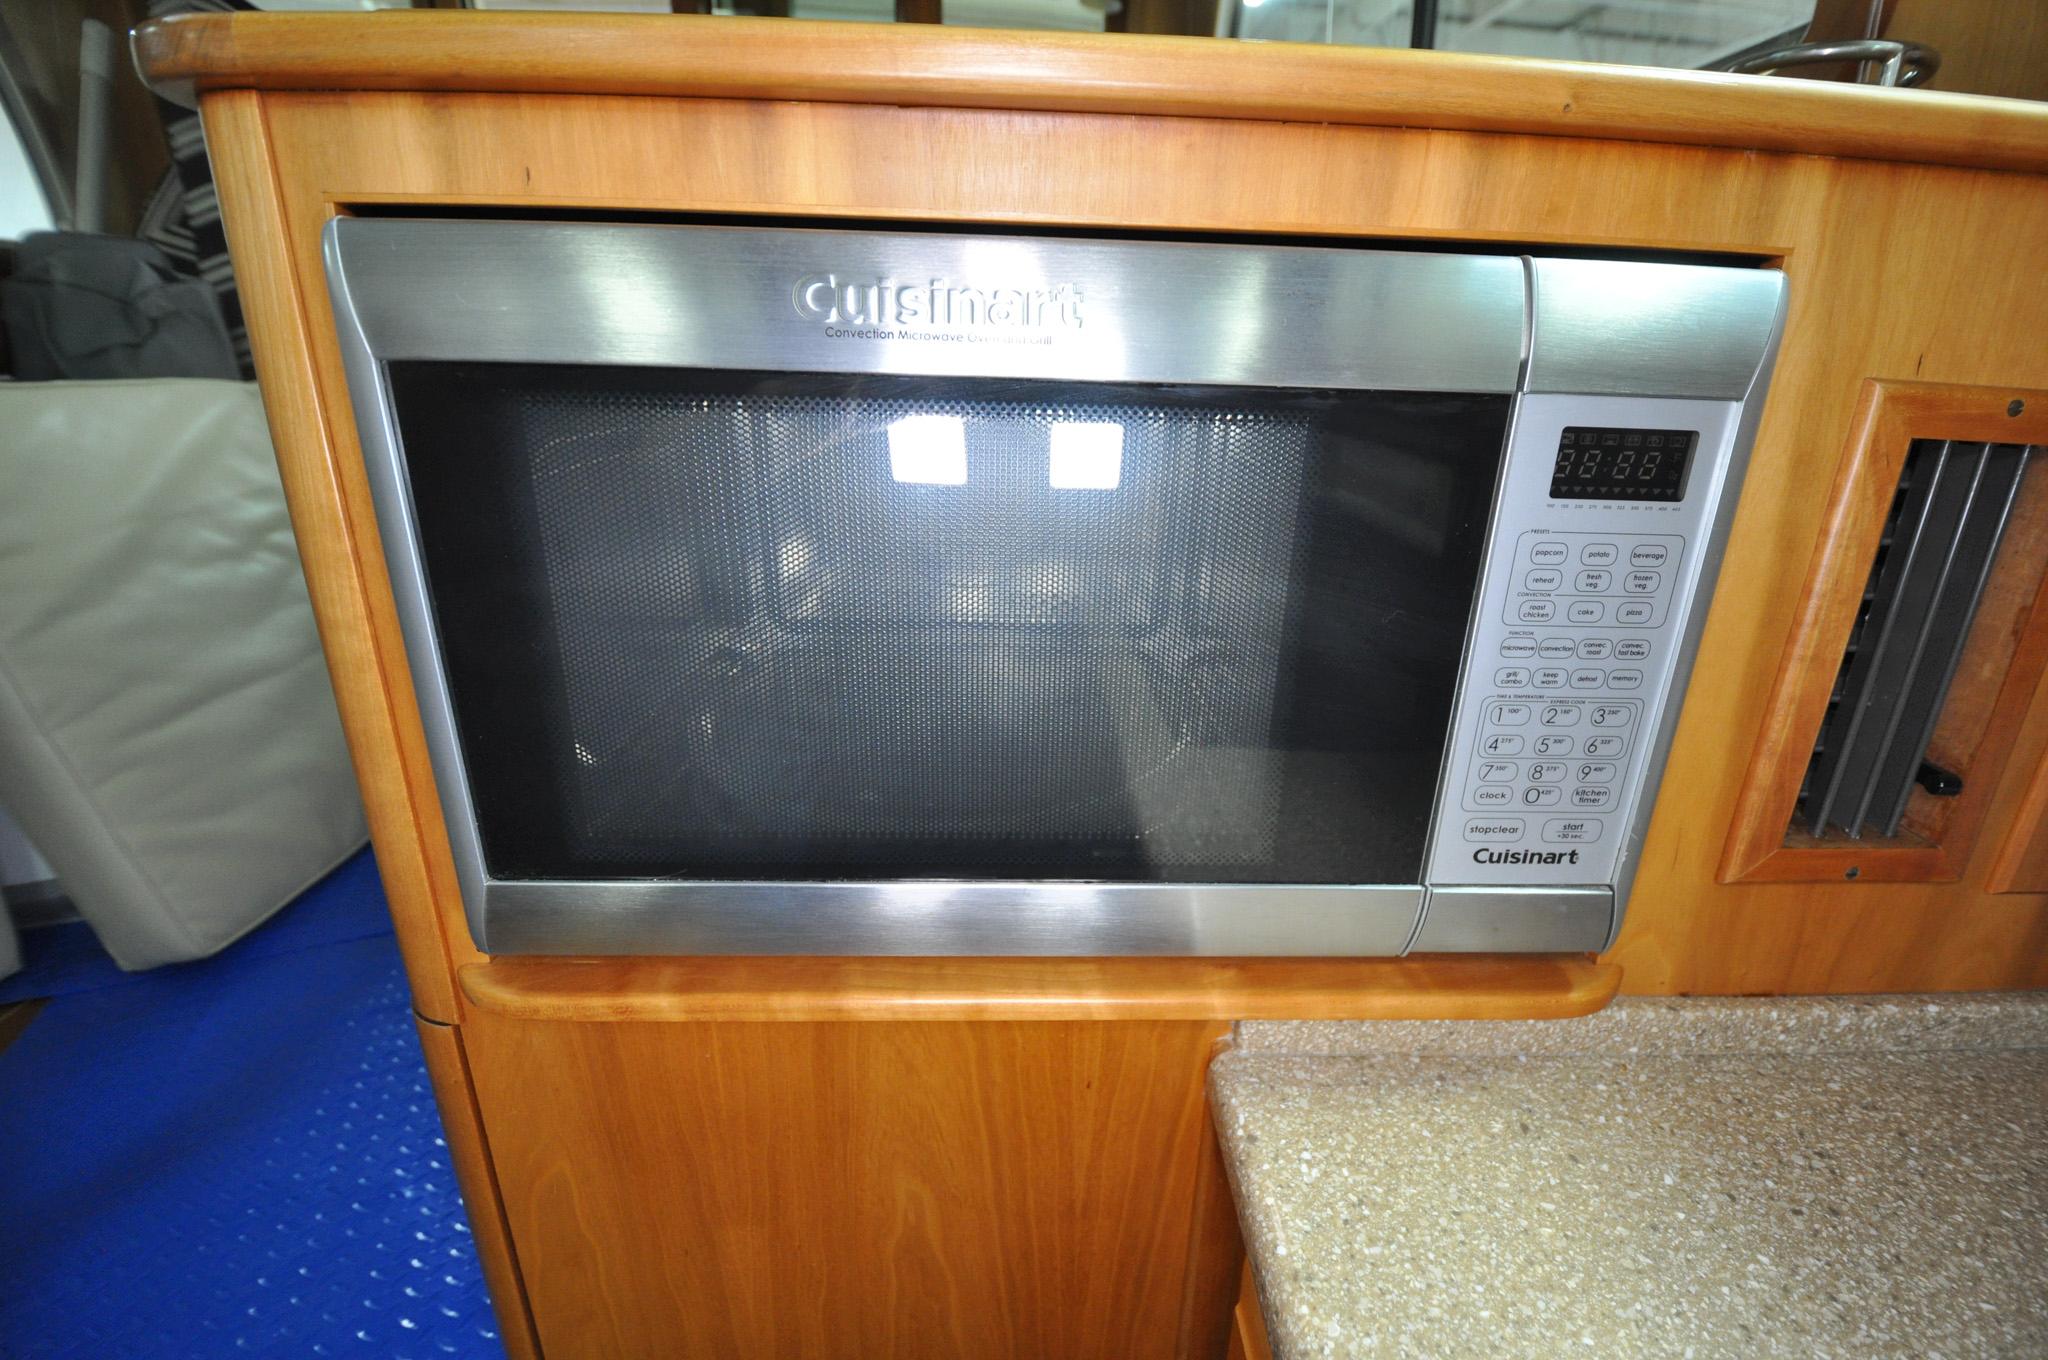 Sabre 40 Sedan - Tempest - In Storage - Galley - Convection Microwave Oven and Grill